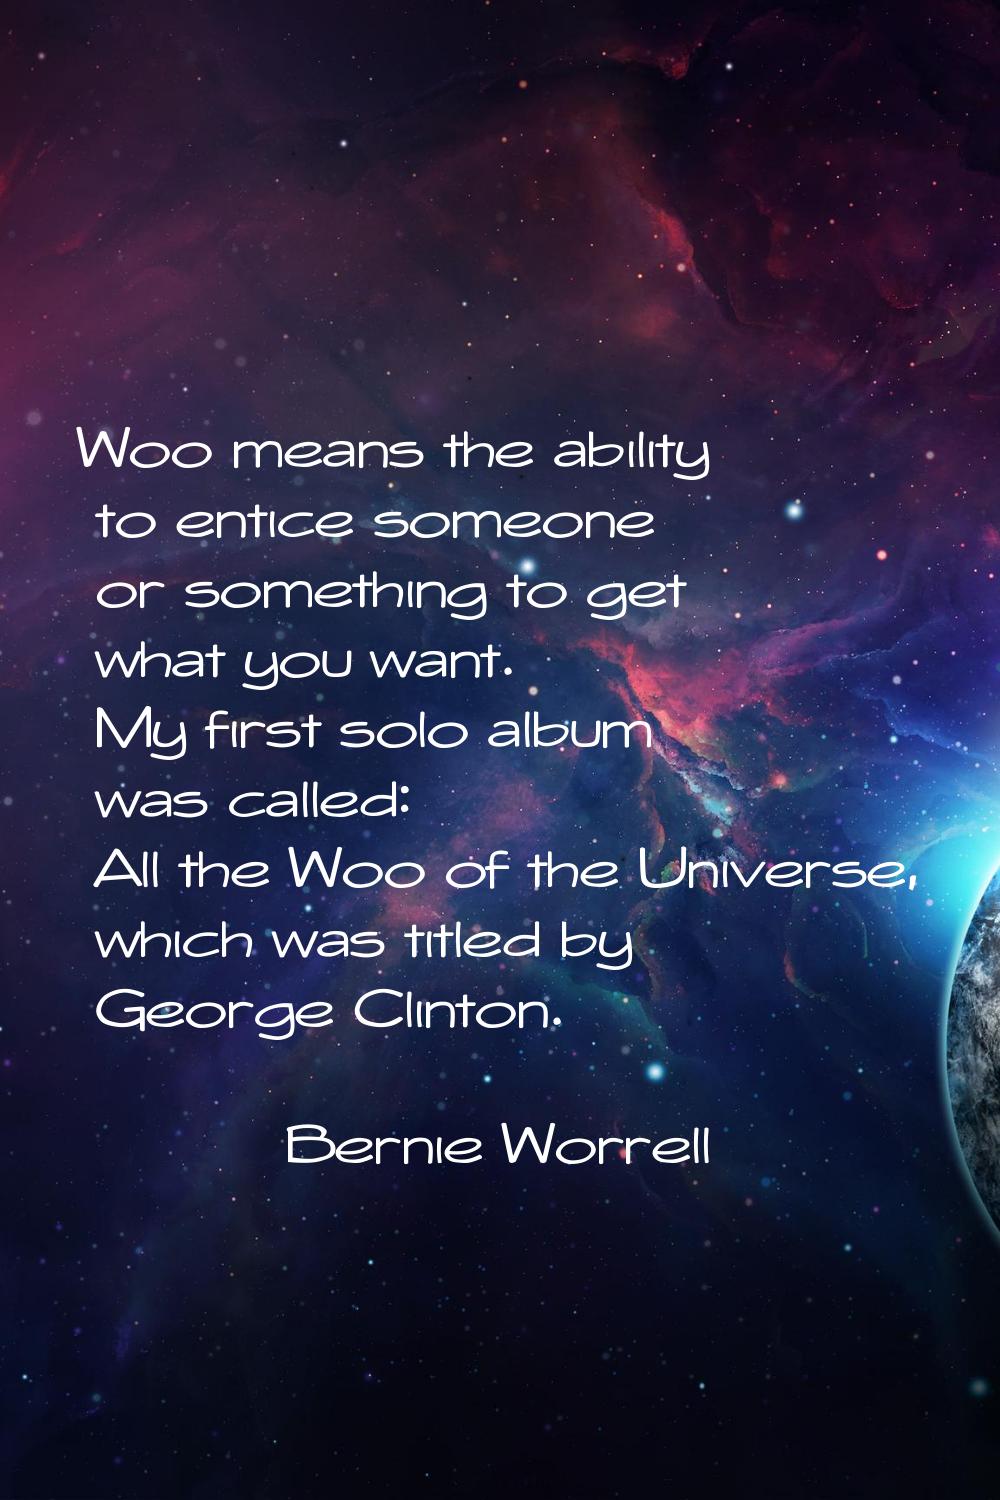 Woo means the ability to entice someone or something to get what you want. My first solo album was 